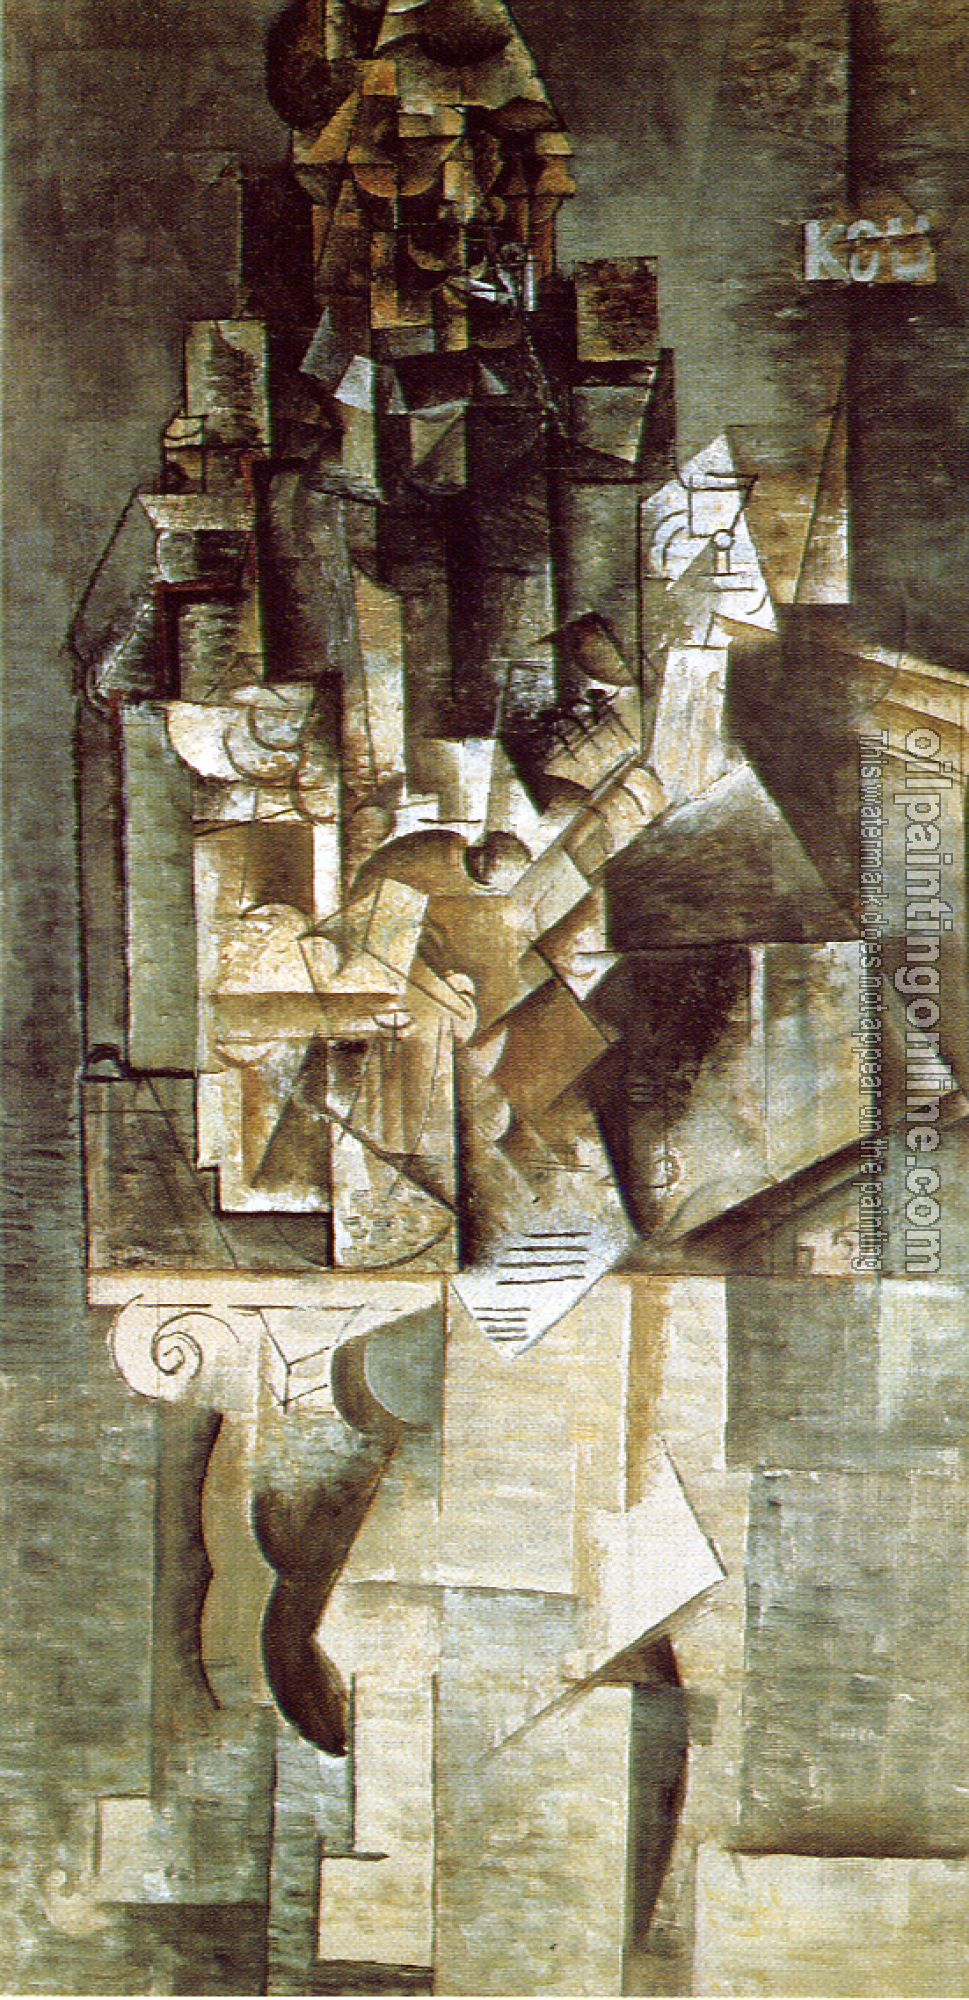 Picasso, Pablo - man with a guitar